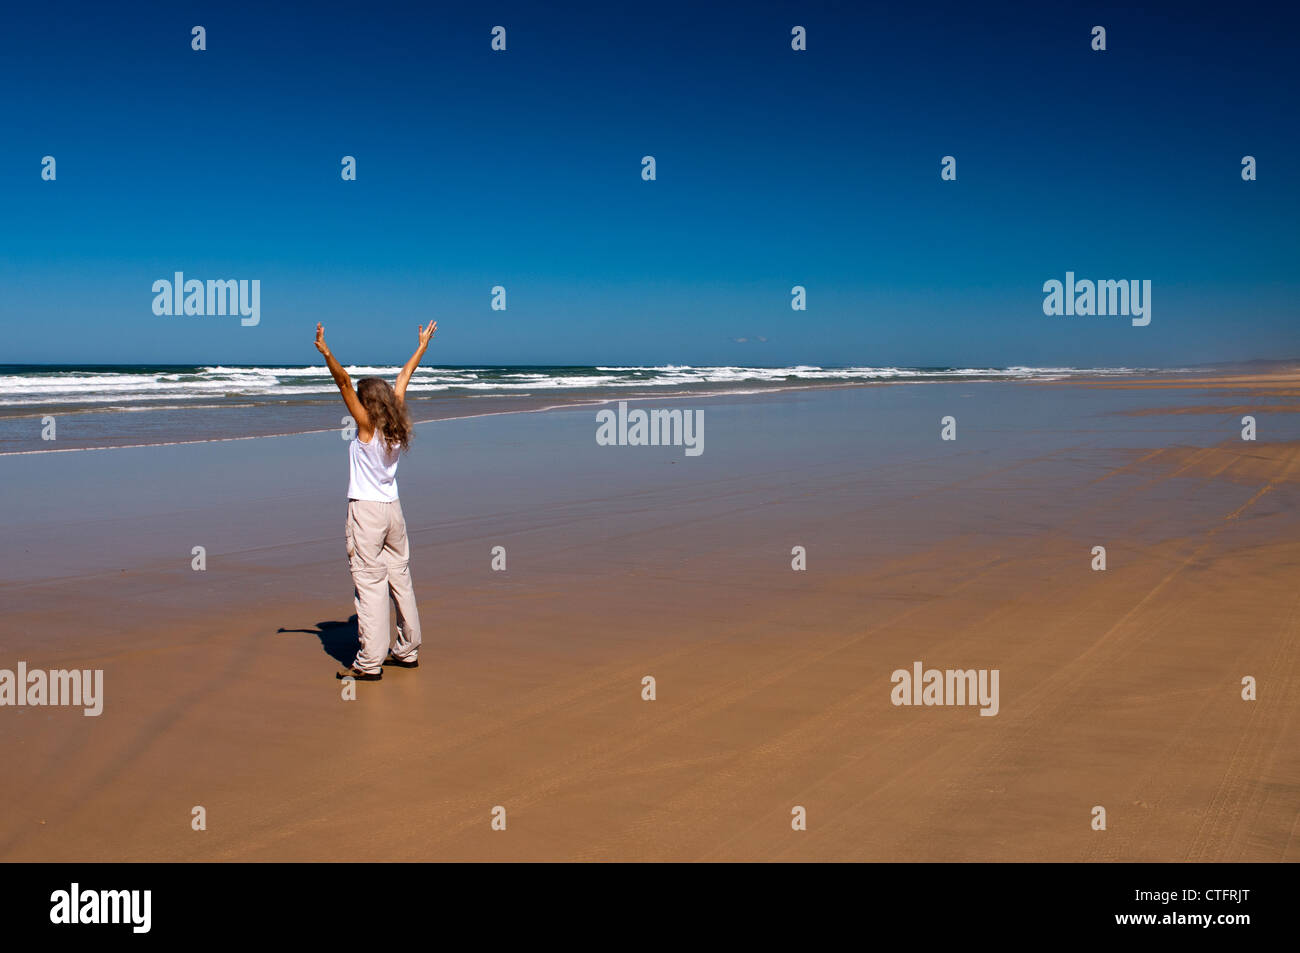 Woman standing alone on a beach on a bright sunny day. Stock Photo